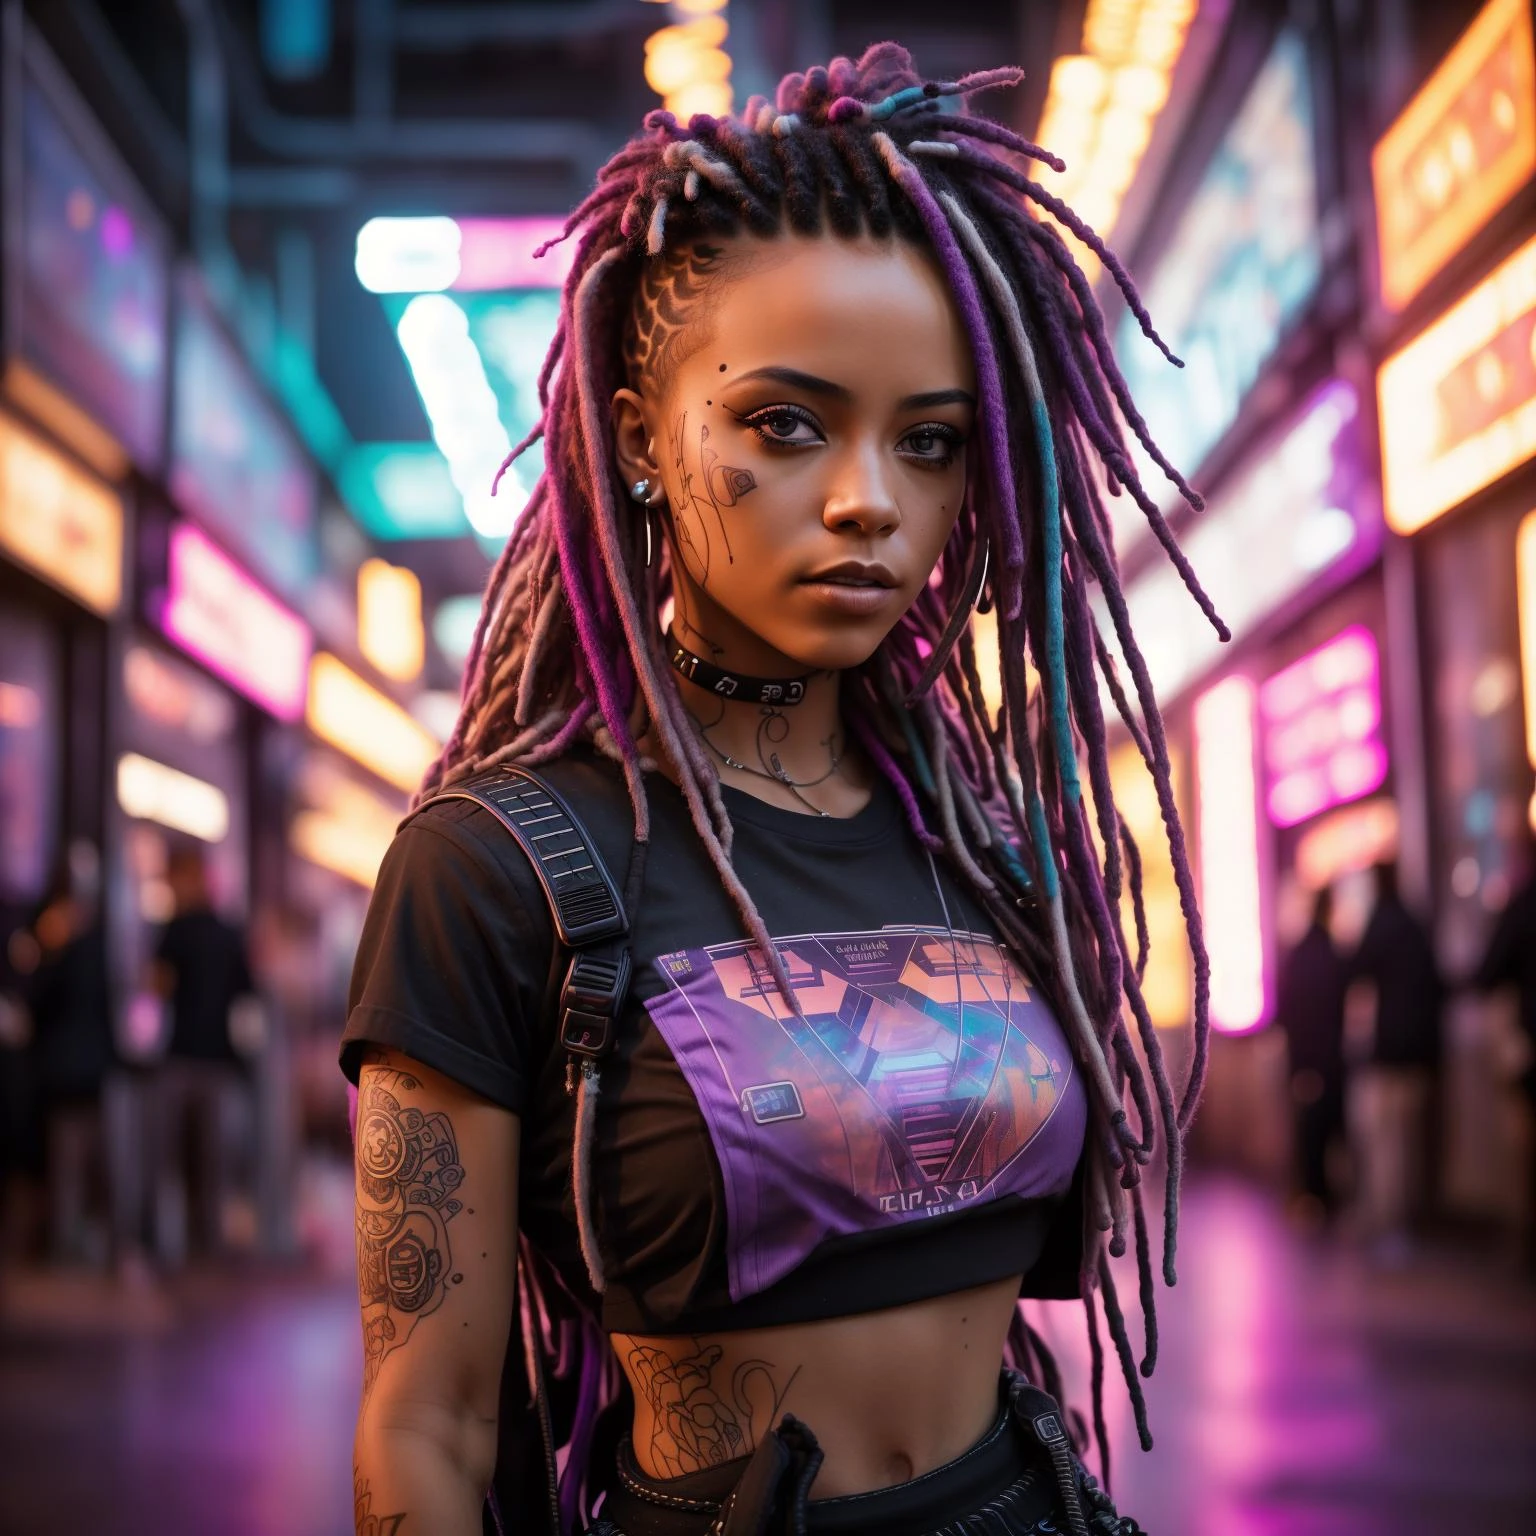 A photo of a female with vibrant purple dreadlocks, dressed in a futuristic t-shirt and ripped jeans. The dynamic lights and energy of the arcade floor enhance the overall composition. Epic character composition, sharp focus, and natural lighting. The subsurface scattering effect adds a touch of an ethereal glow, while the f2 aperture and 35mm lens create a perfect balance of depth and detail.  7cy6er7p0nk9